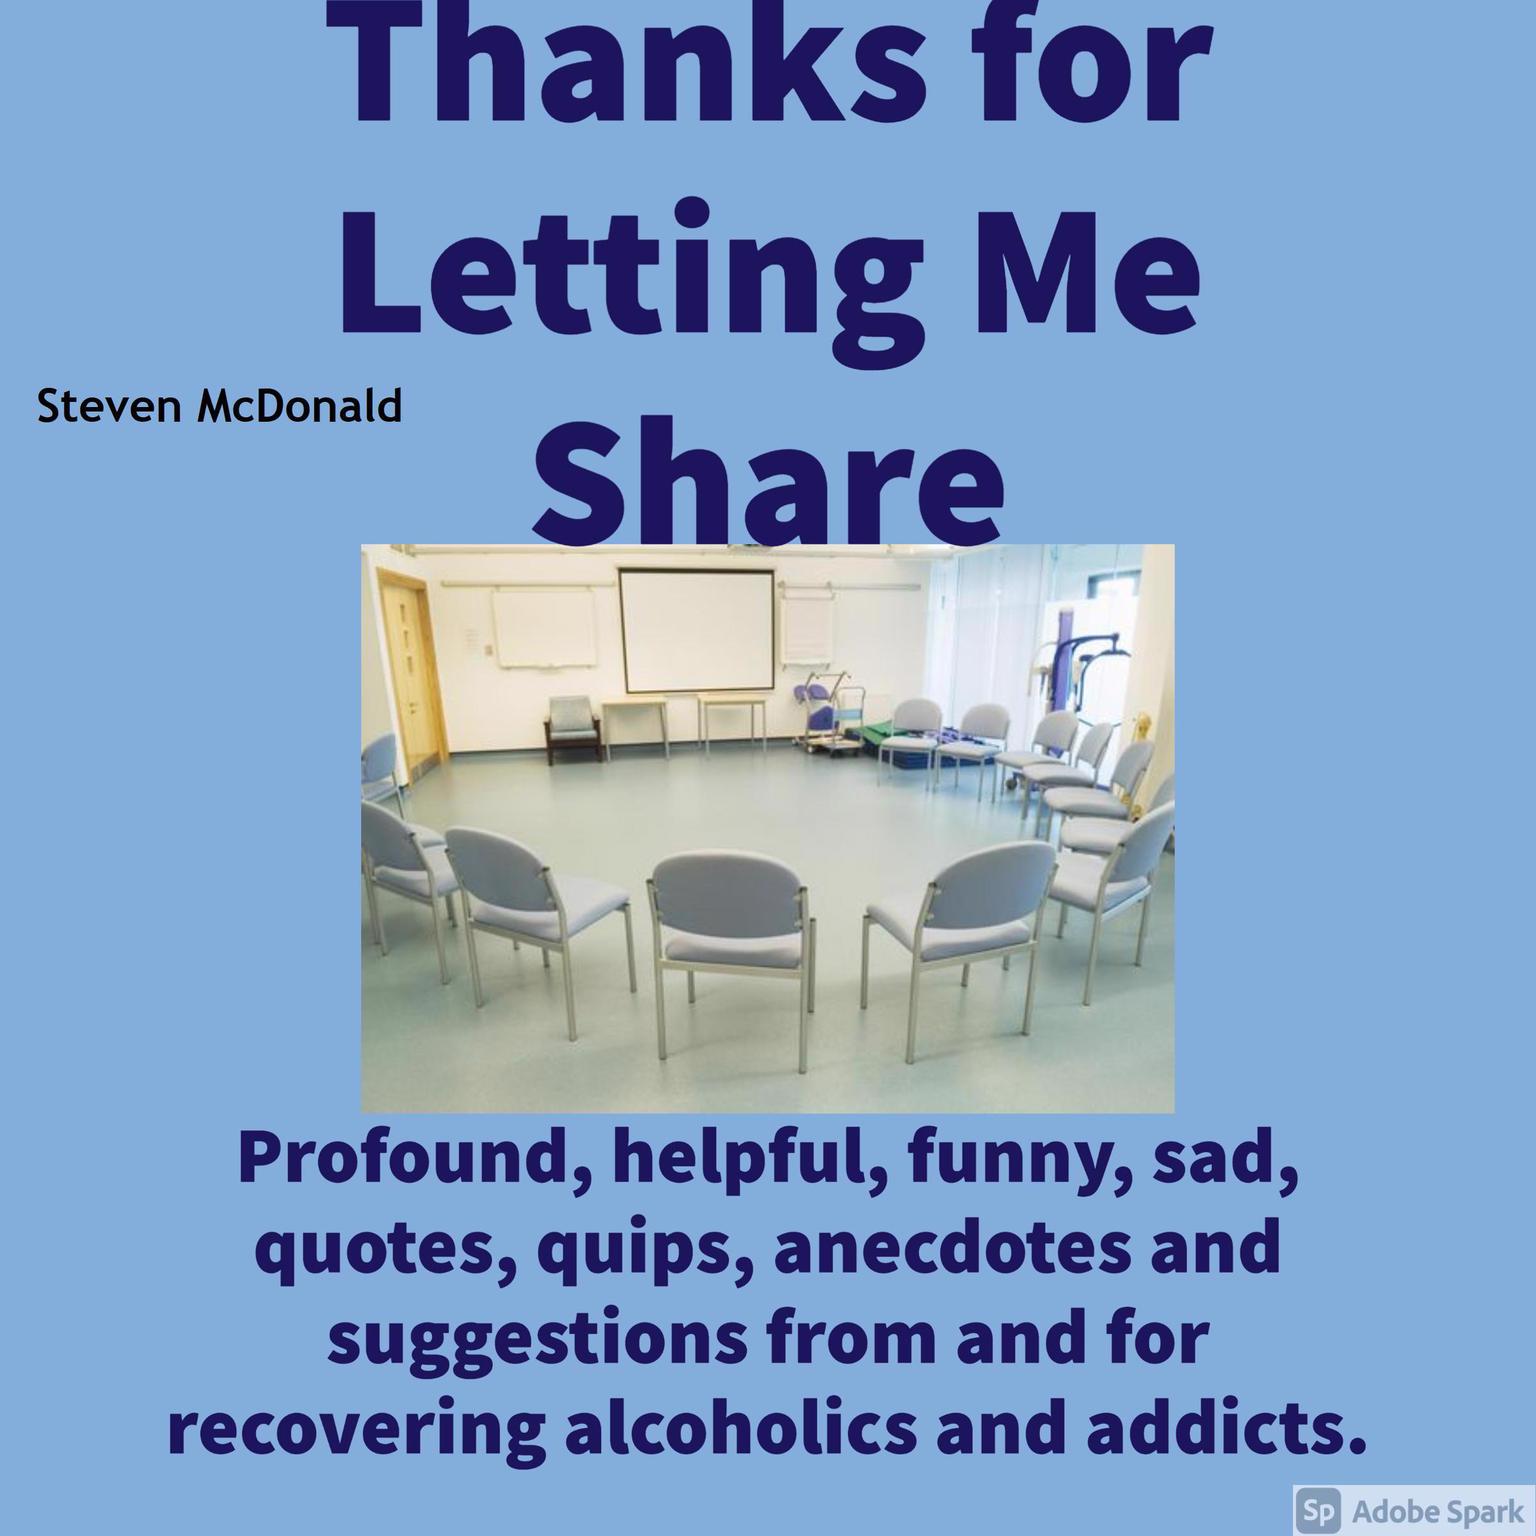 Thanks for Letting Me Share: Profound, helpful, funny, sad, quotes, quips, anecdotes and suggestions from and for recovering alcoholics and addicts. Audiobook, by Steven McDonald